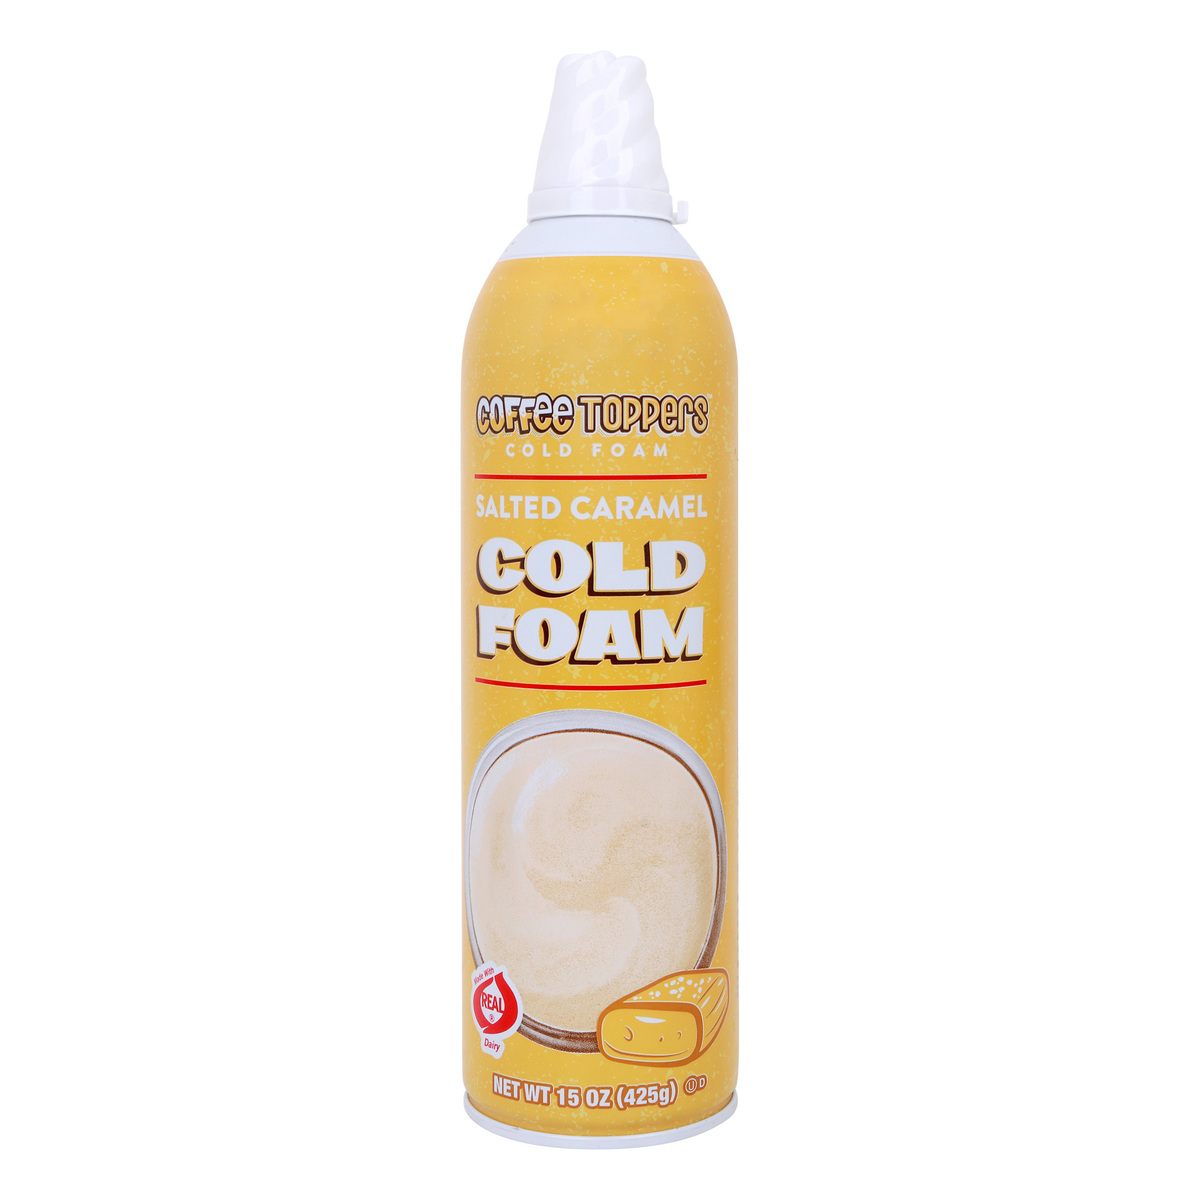 Coffee Toppers Salted Caramel Cold Foam, 425 g